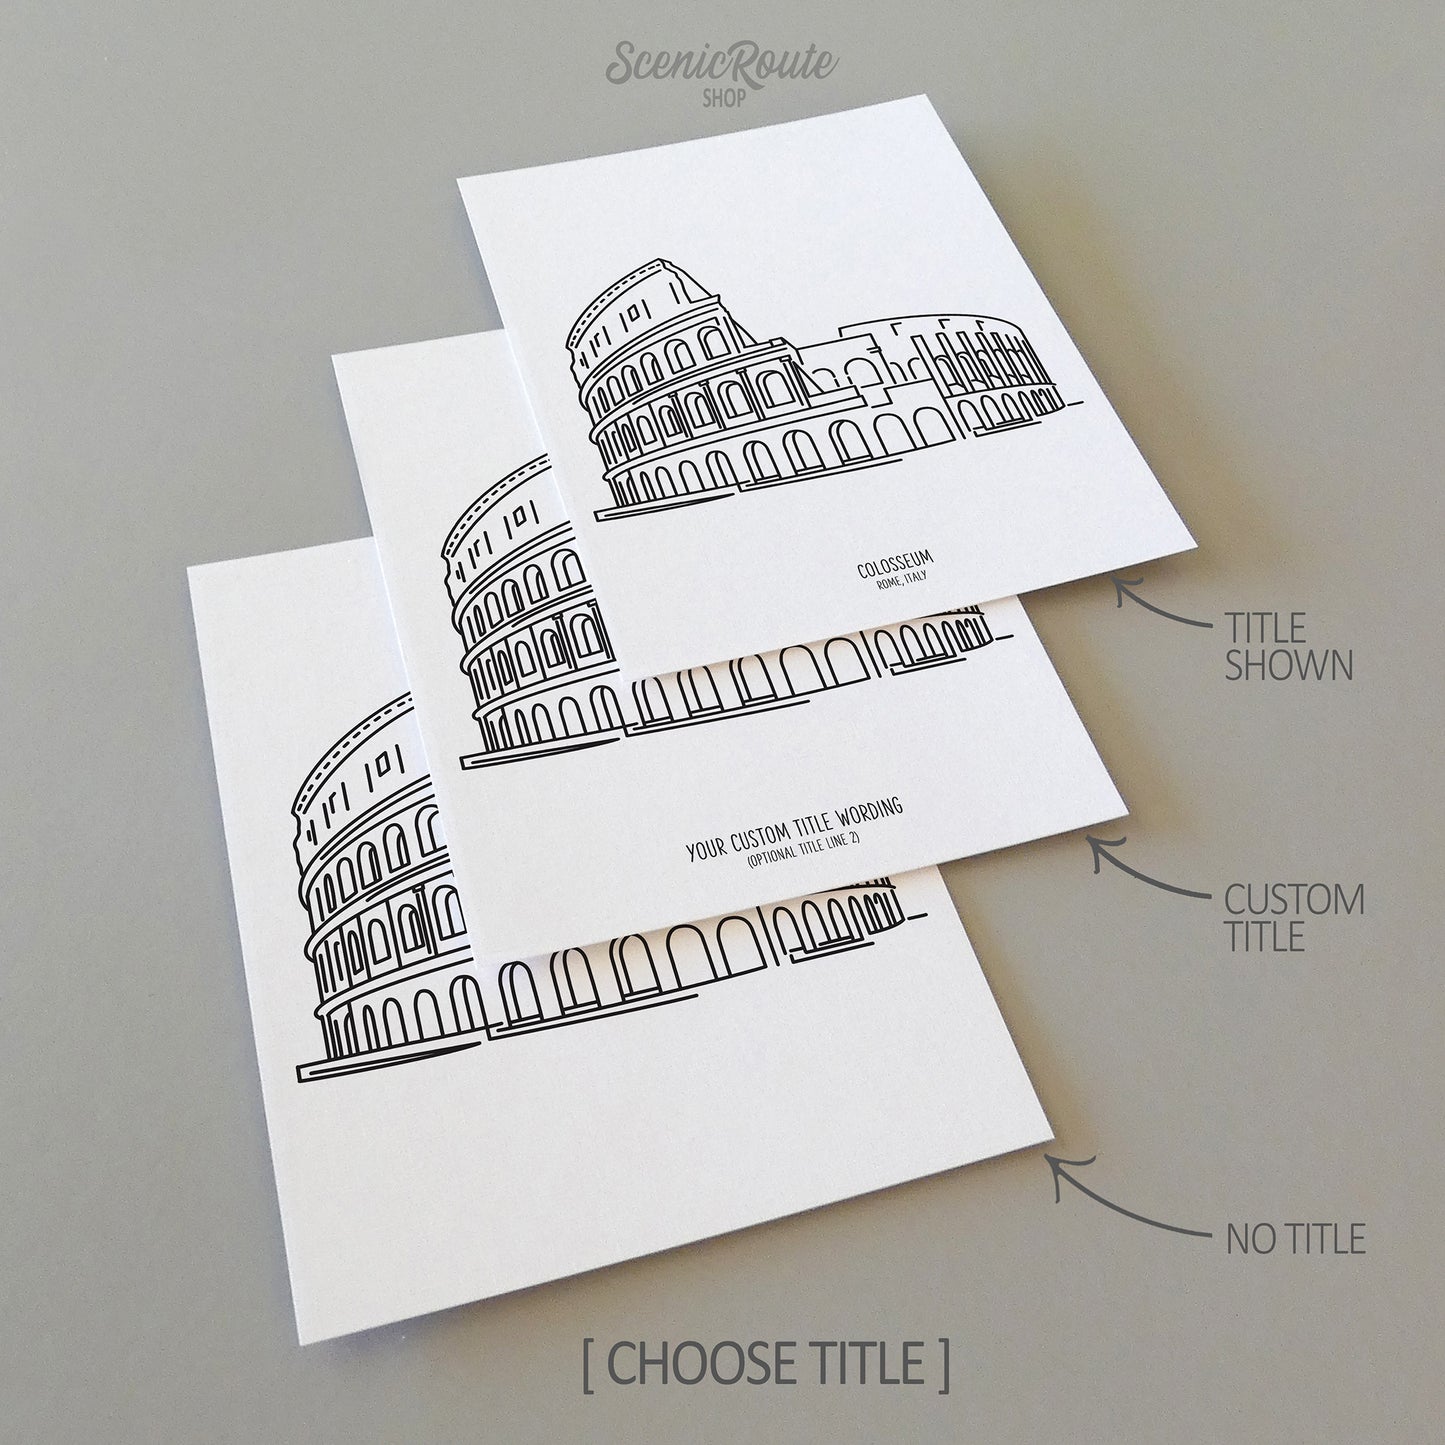 Three line art drawings of the Colosseum in Rome Italy on white linen paper with a gray background.  The pieces are shown with title options that can be chosen and personalized.